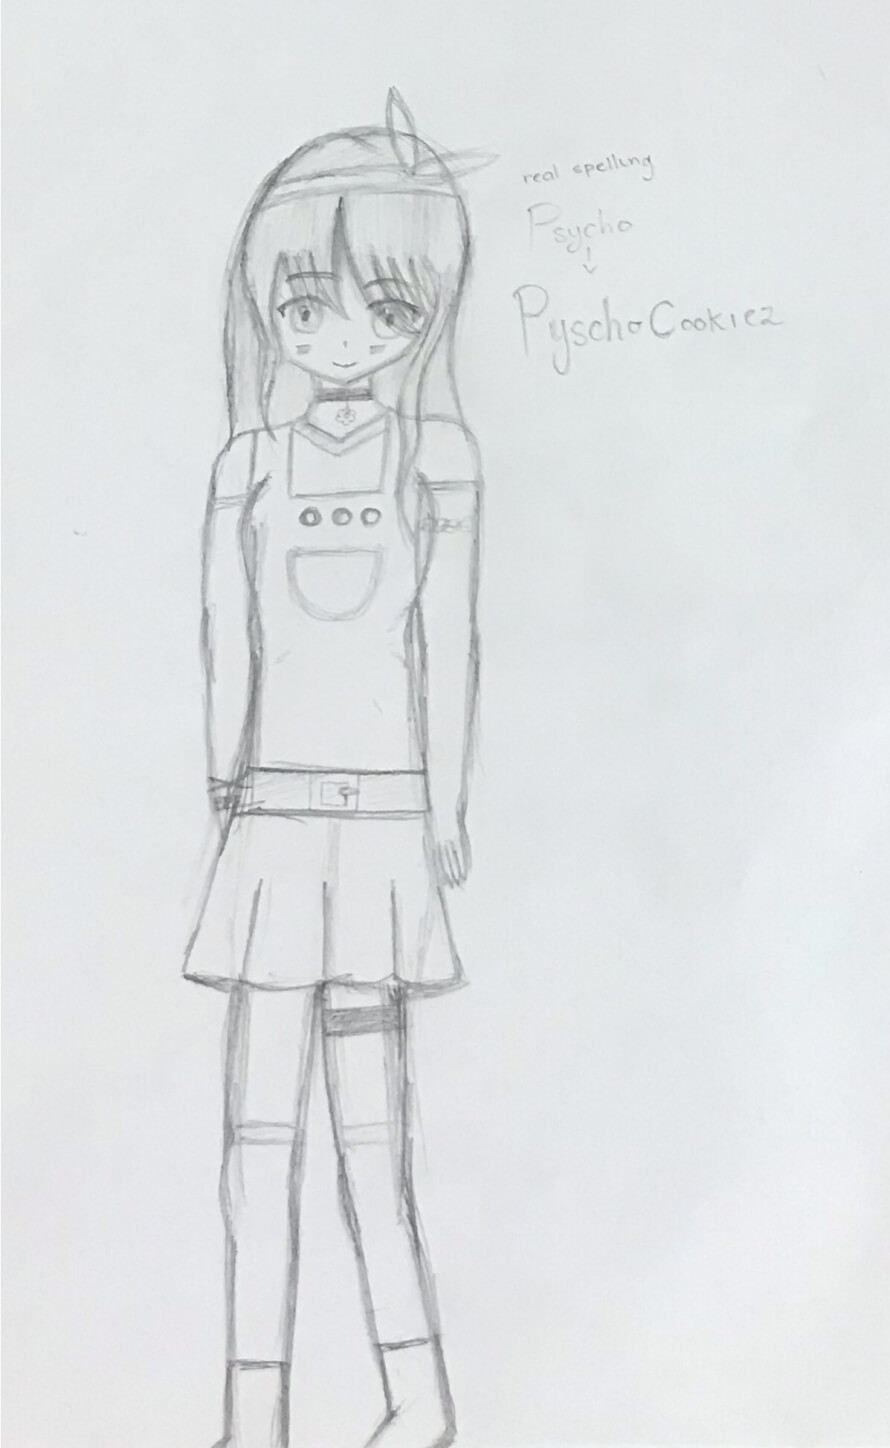 So, I followed uwumi’s art tips to create this drawing! Thank you so much uwumi for helping and...